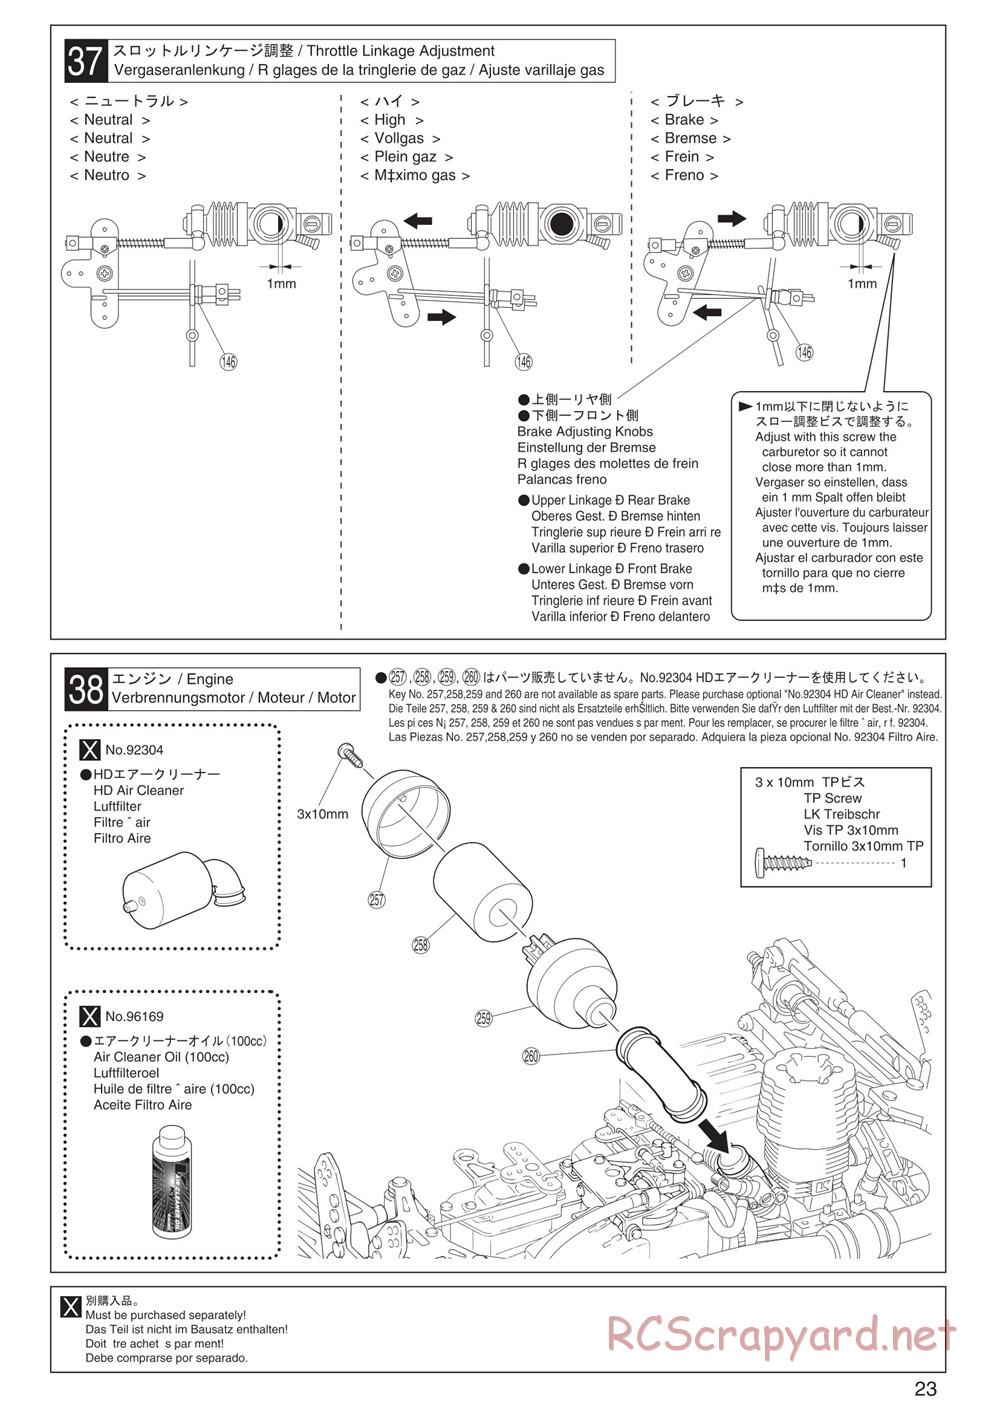 Kyosho - Inferno ST (2005) - Manual - Page 23